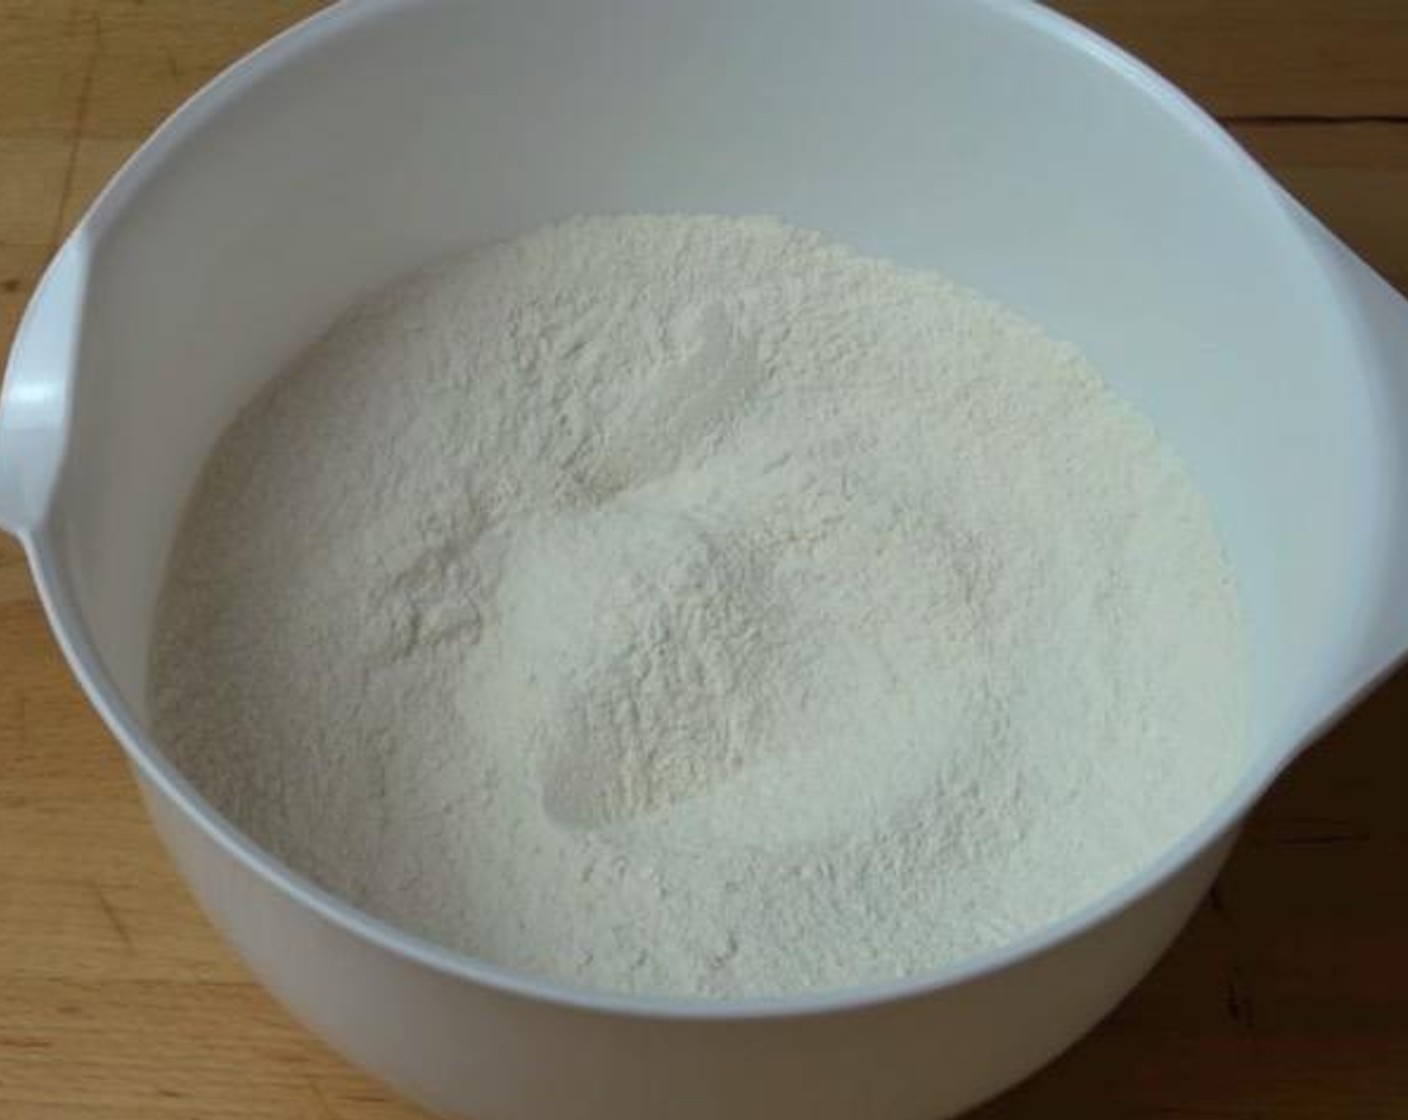 step 1 In a large mixing bowl, add Self-Rising Flour (1 1/2 cups), Baking Powder (1/2 tsp) and Caster Sugar (1/2 cup). Mix together to combine.